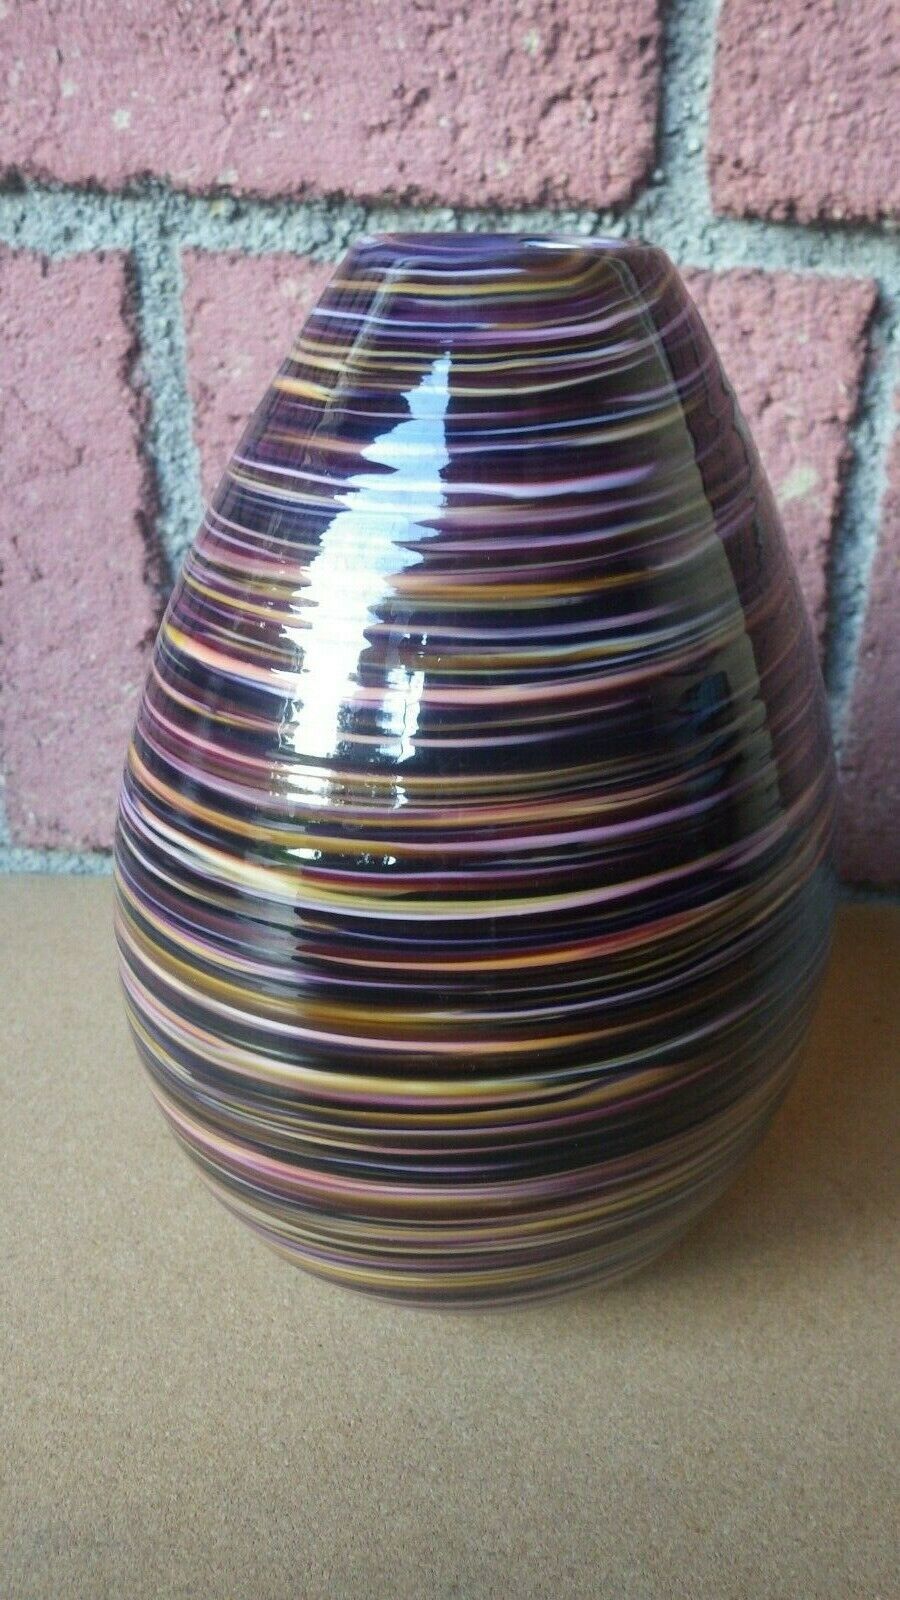 Primary image for LARGE CALEB SIEMON SPUN CANDY SWIRL ART GLASS VASE SIGNED HAND BLOWN 2009